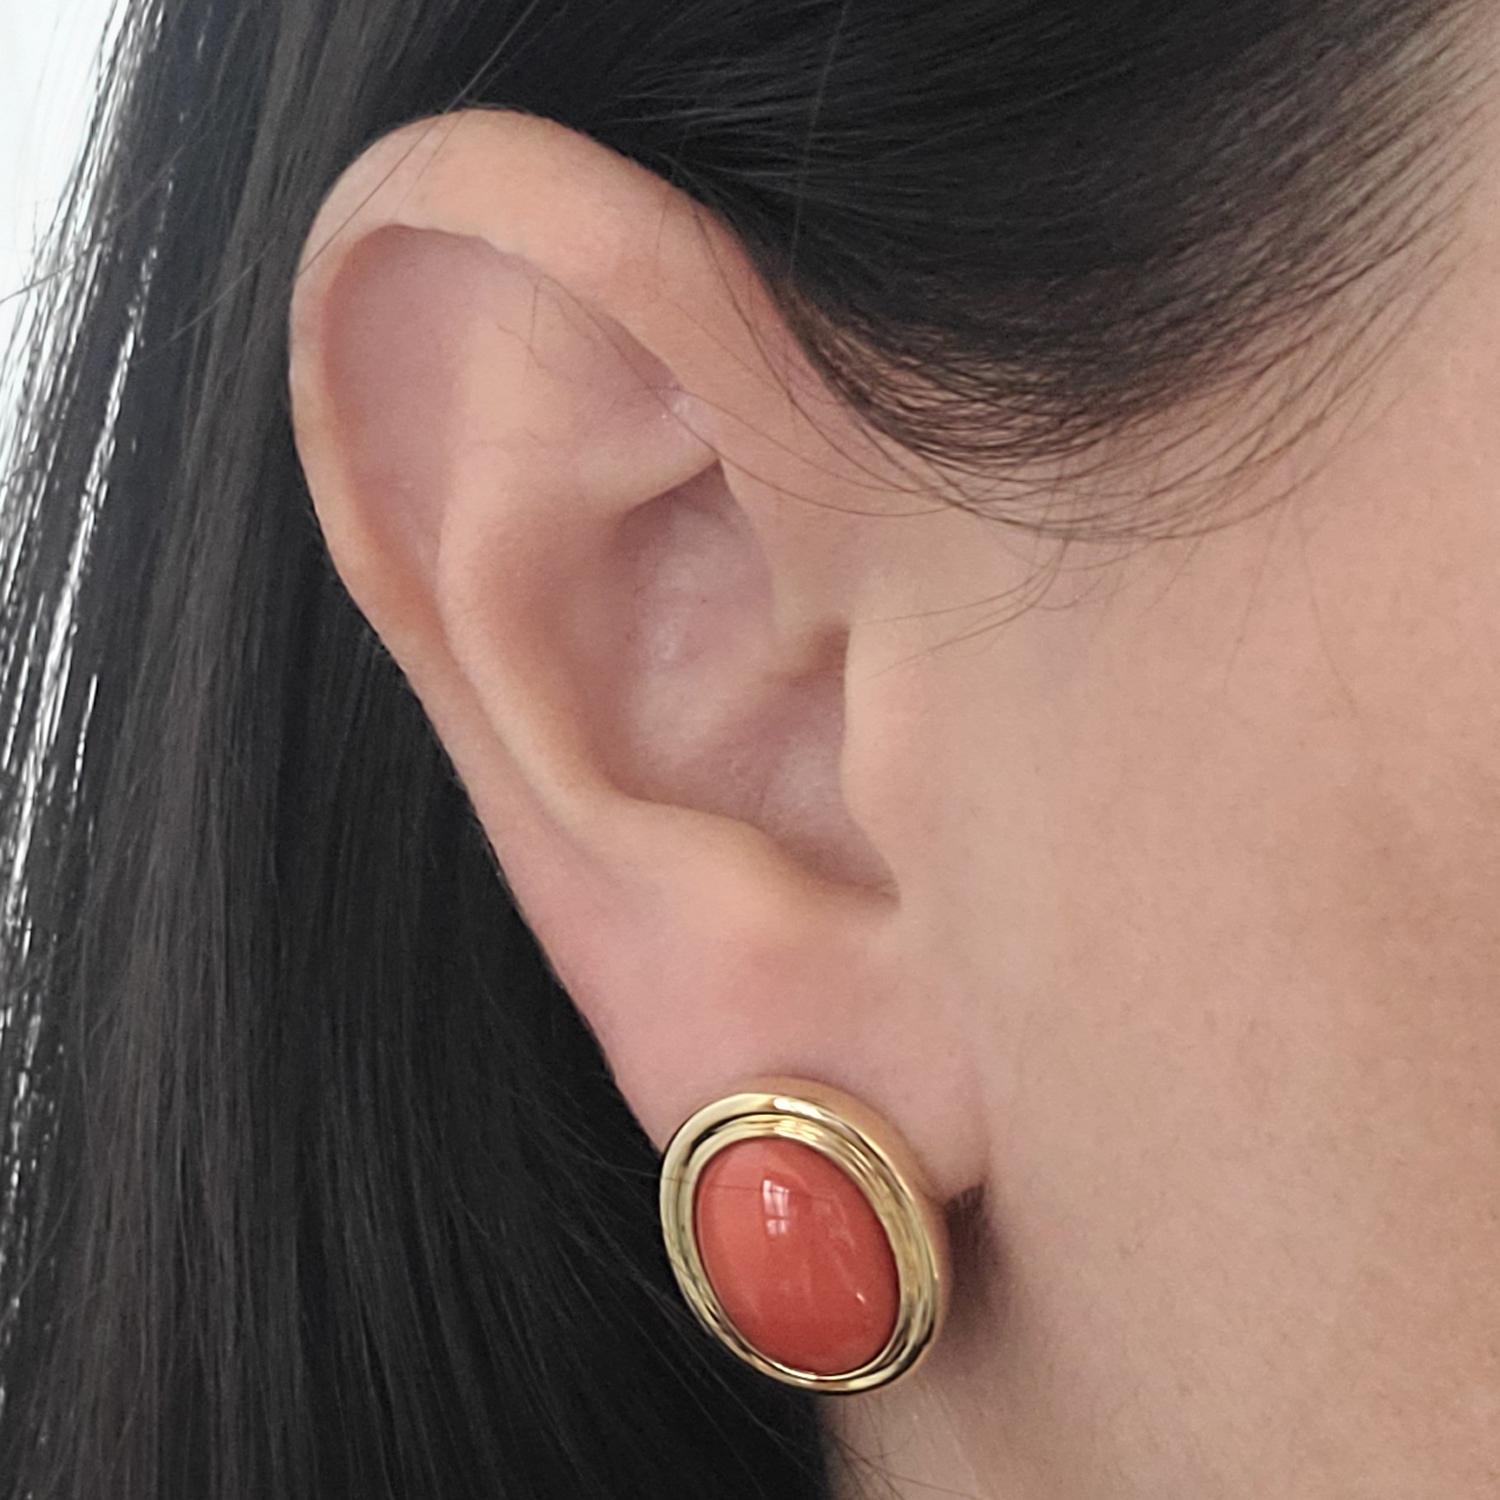 14 Karat Yellow Gold Classic Coral Stud Earrings. These Timeless Clip-On Studs 2 Bezel Set Oval Cabochon-cut Bright Orangey-Red Corals Measuring Approximately 15mm x 11mm. Pierced Post with Supportive Hinged Omega Back; Post Removed Upon Request.